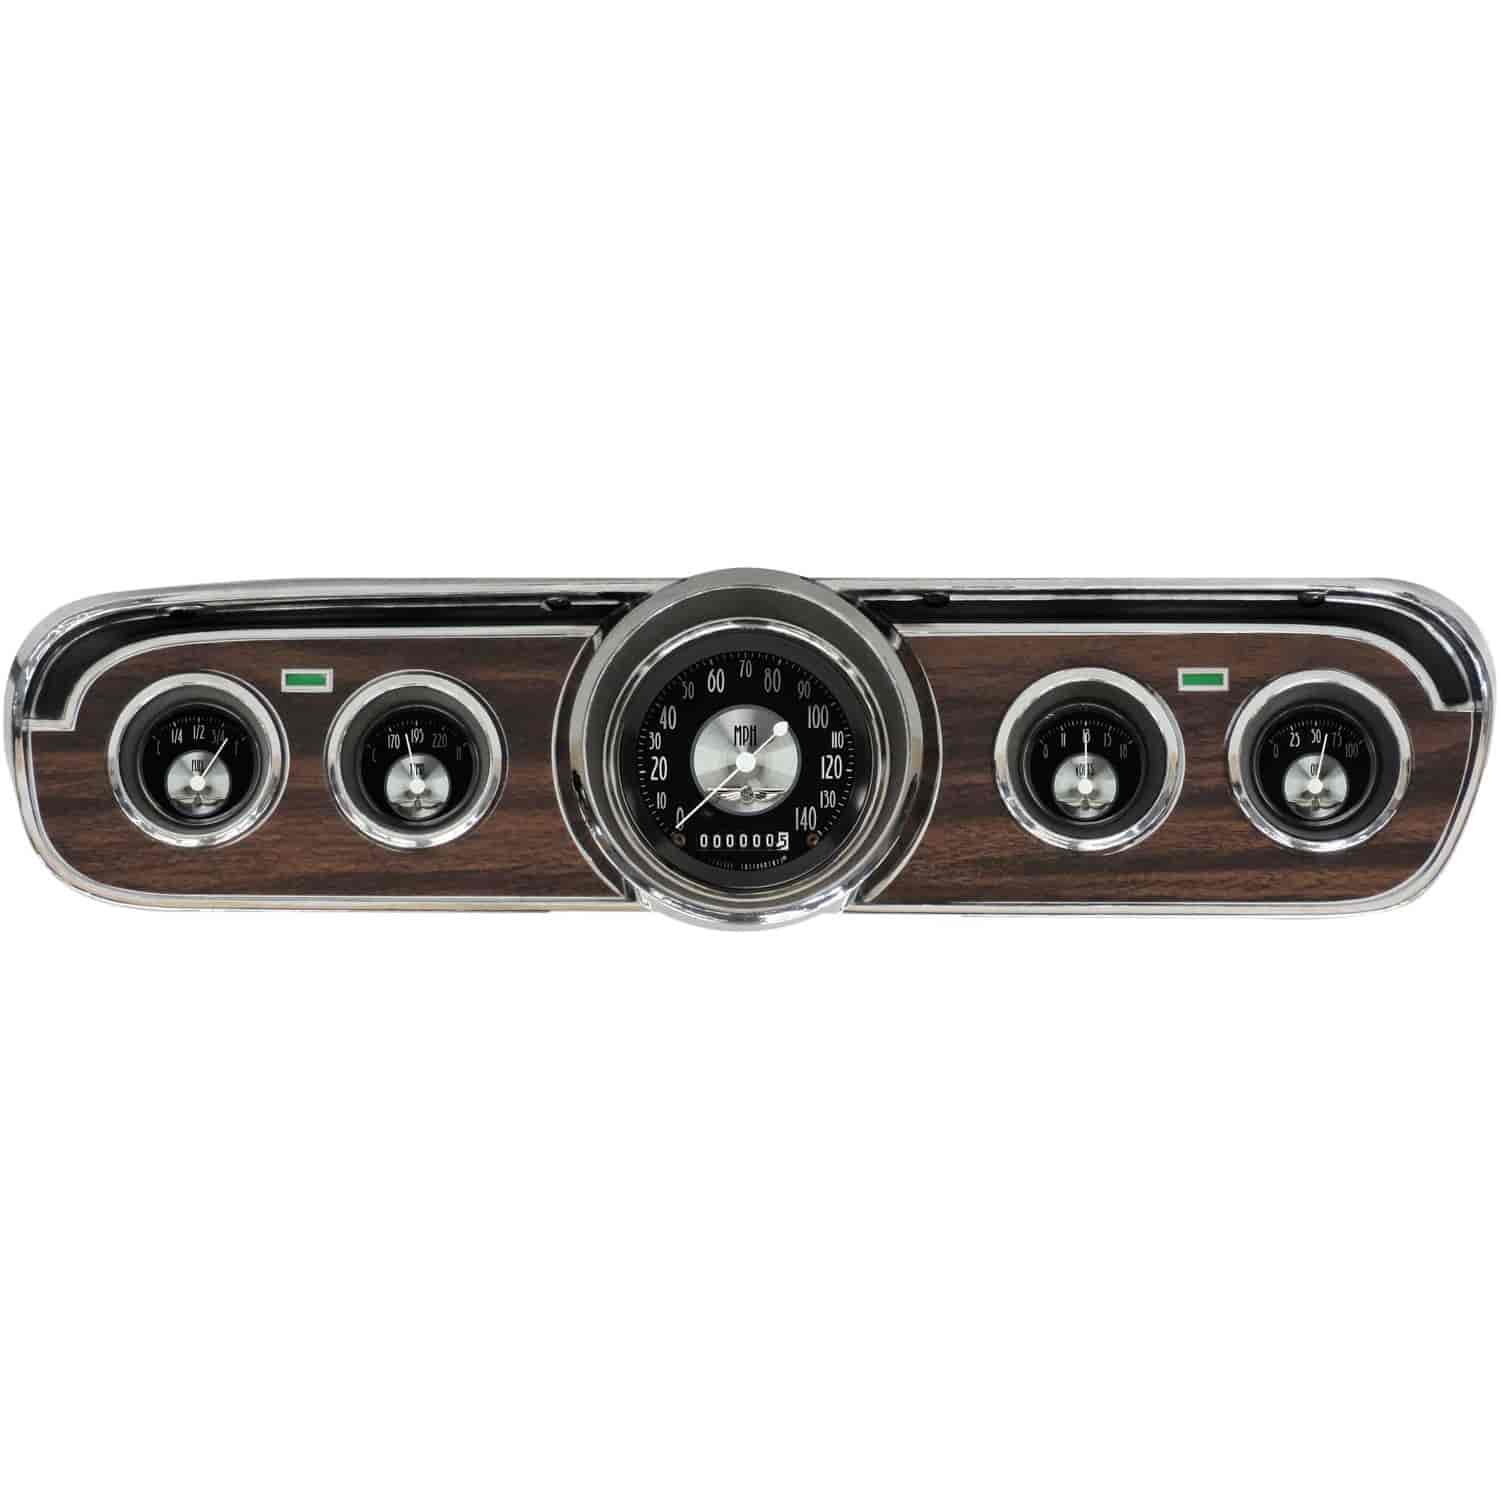 All-American Tradition Series Gauge Package 1965-66 Mustang Includes: